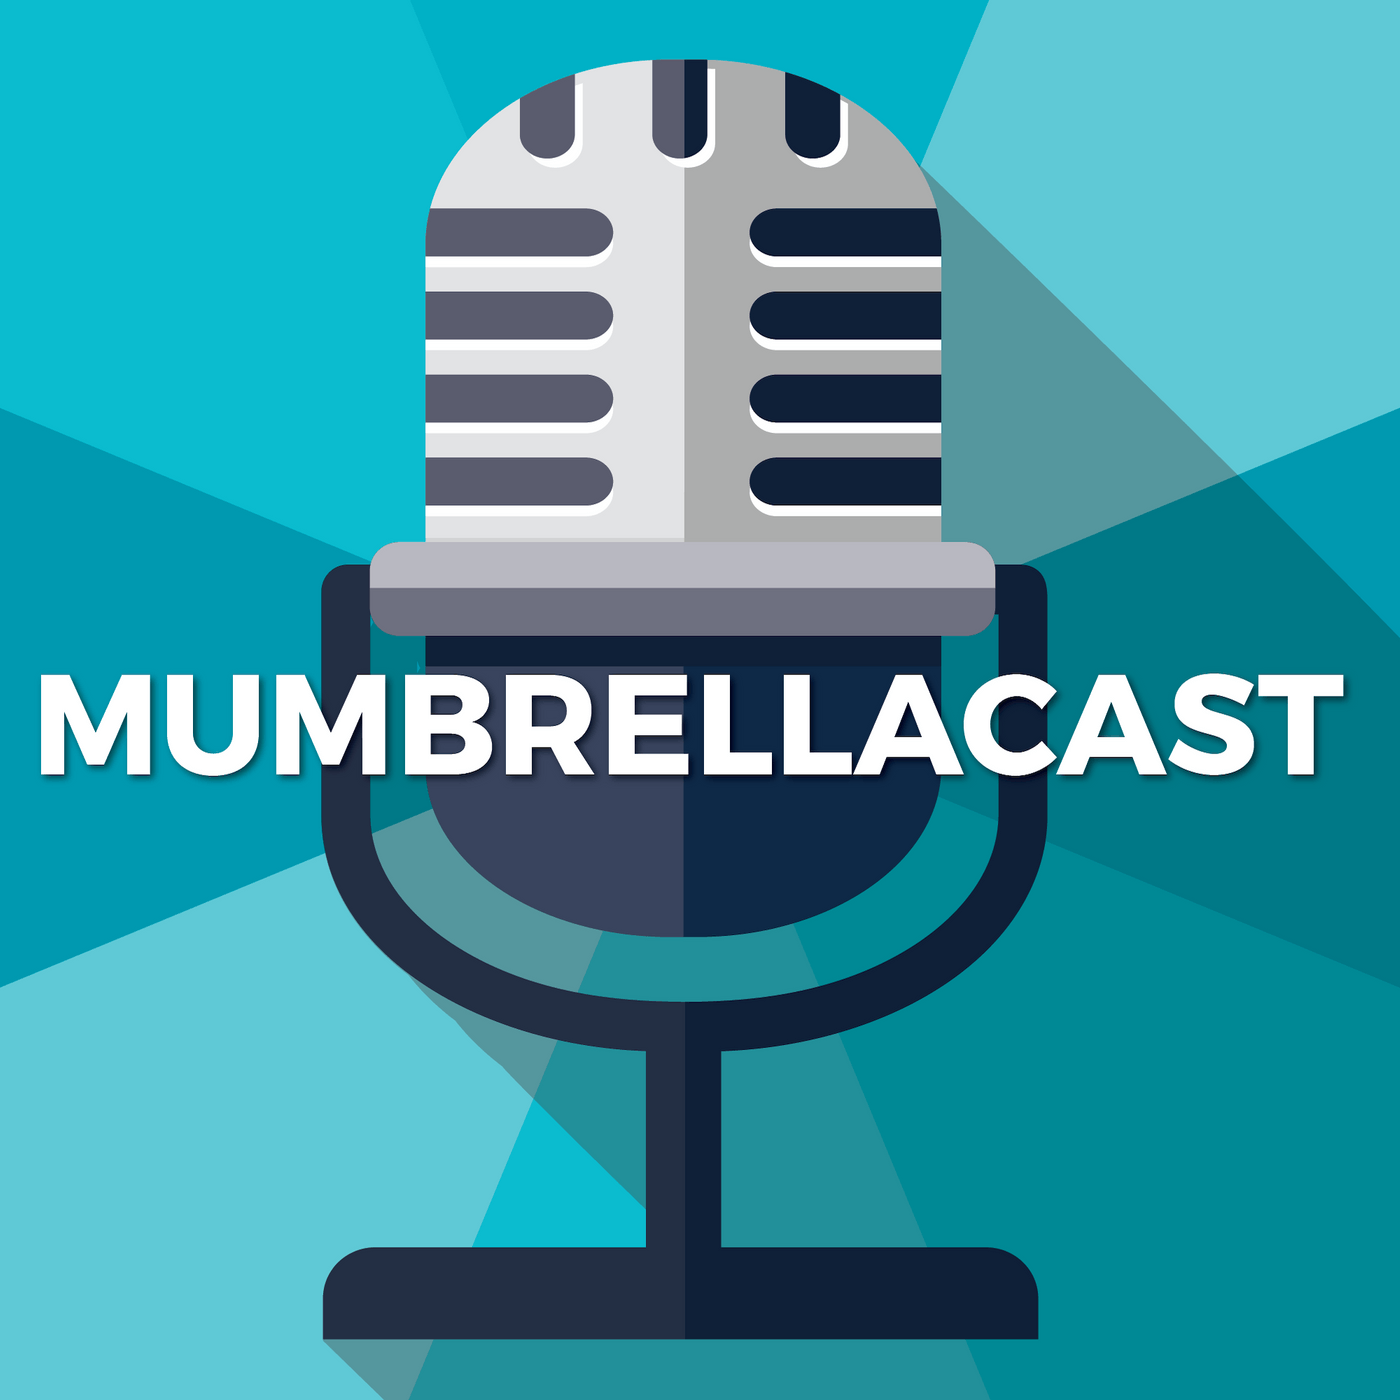 Mumbrellacast: Max Markson On Controversial Campaigns, Who He Would Never Work For, And High-profile Clients